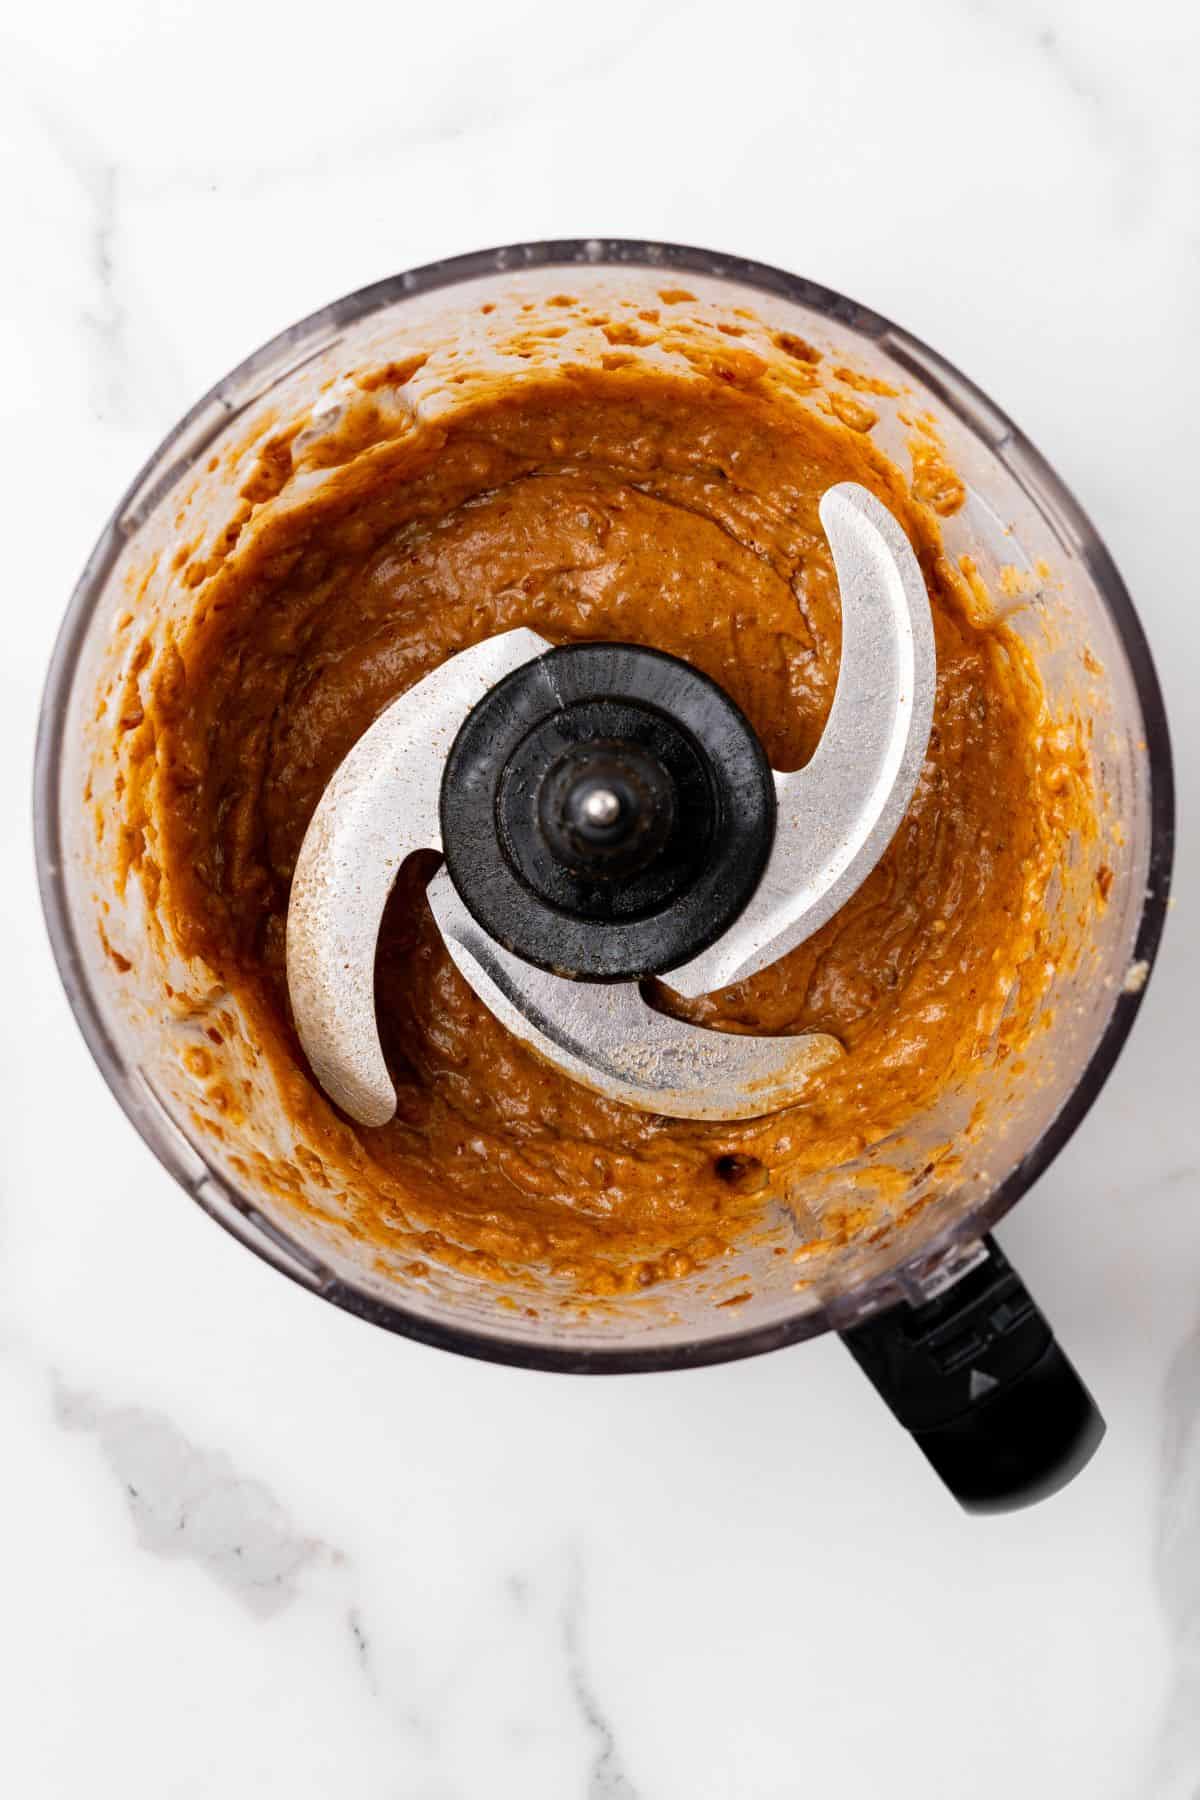 Caramel layer being mixed together in a food processor.